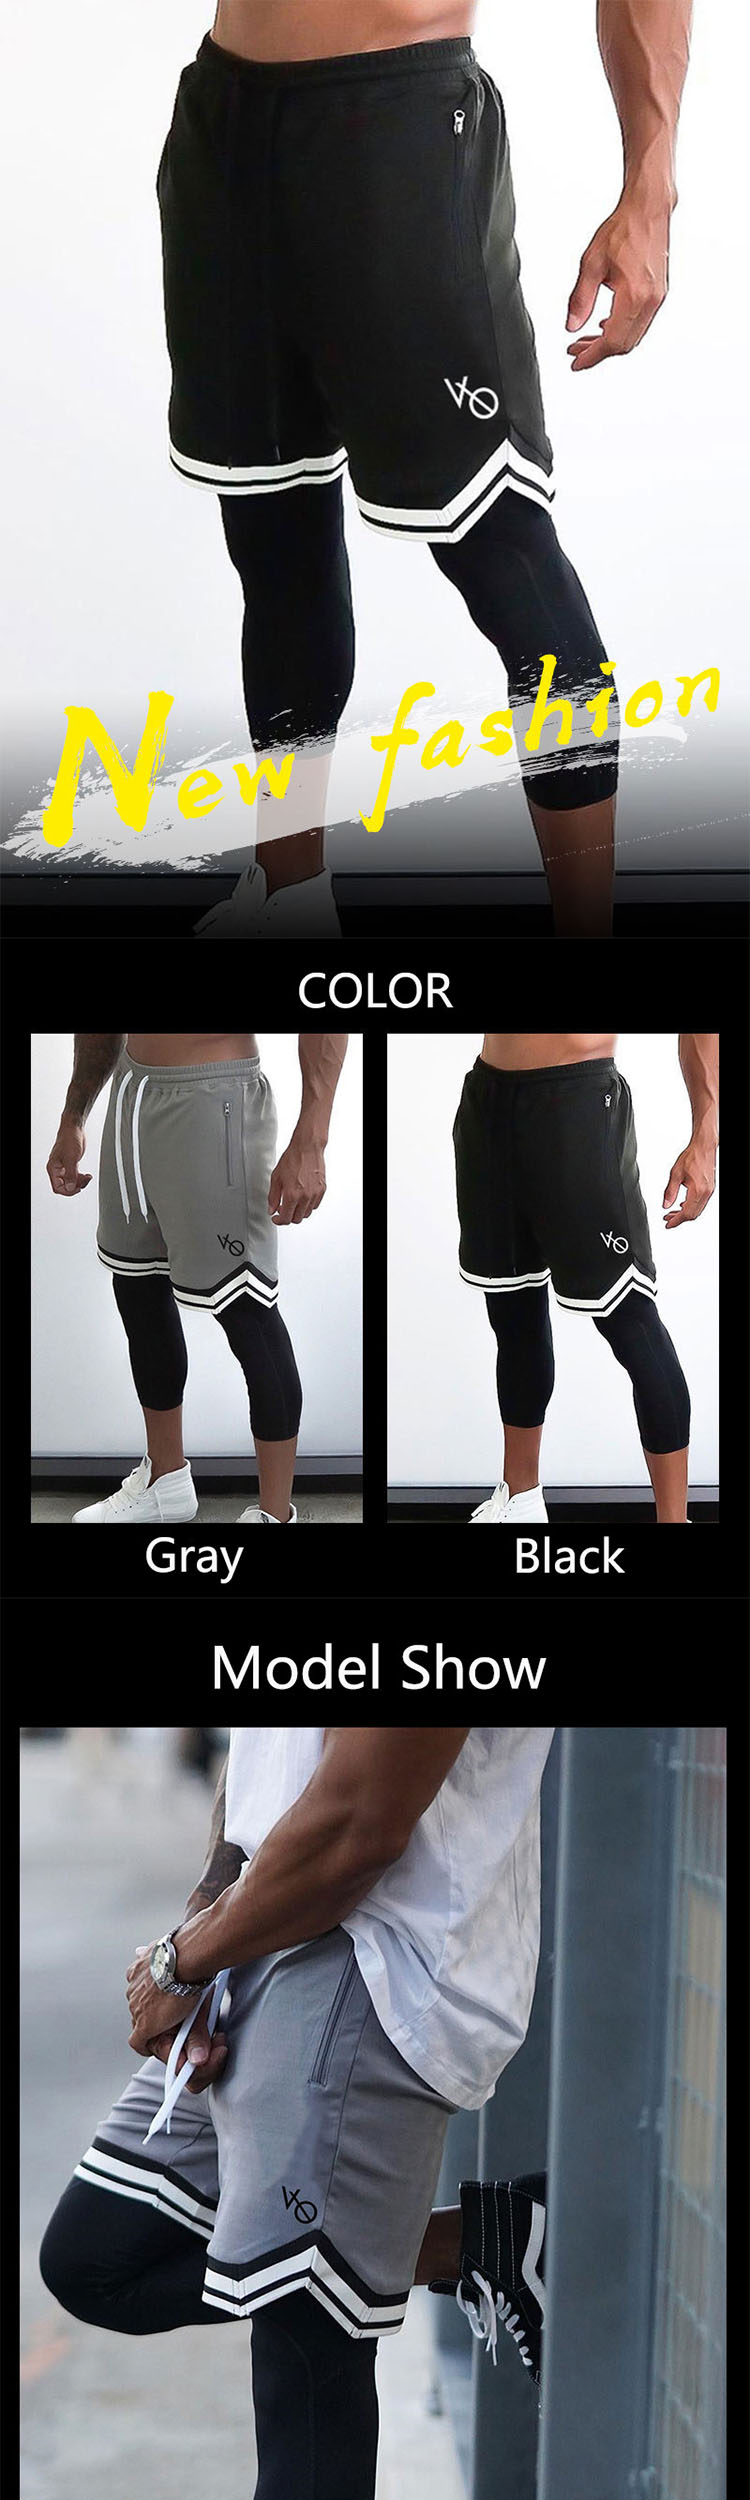 Mens workout shorts mostly appear with elastic drawstrings at the waist